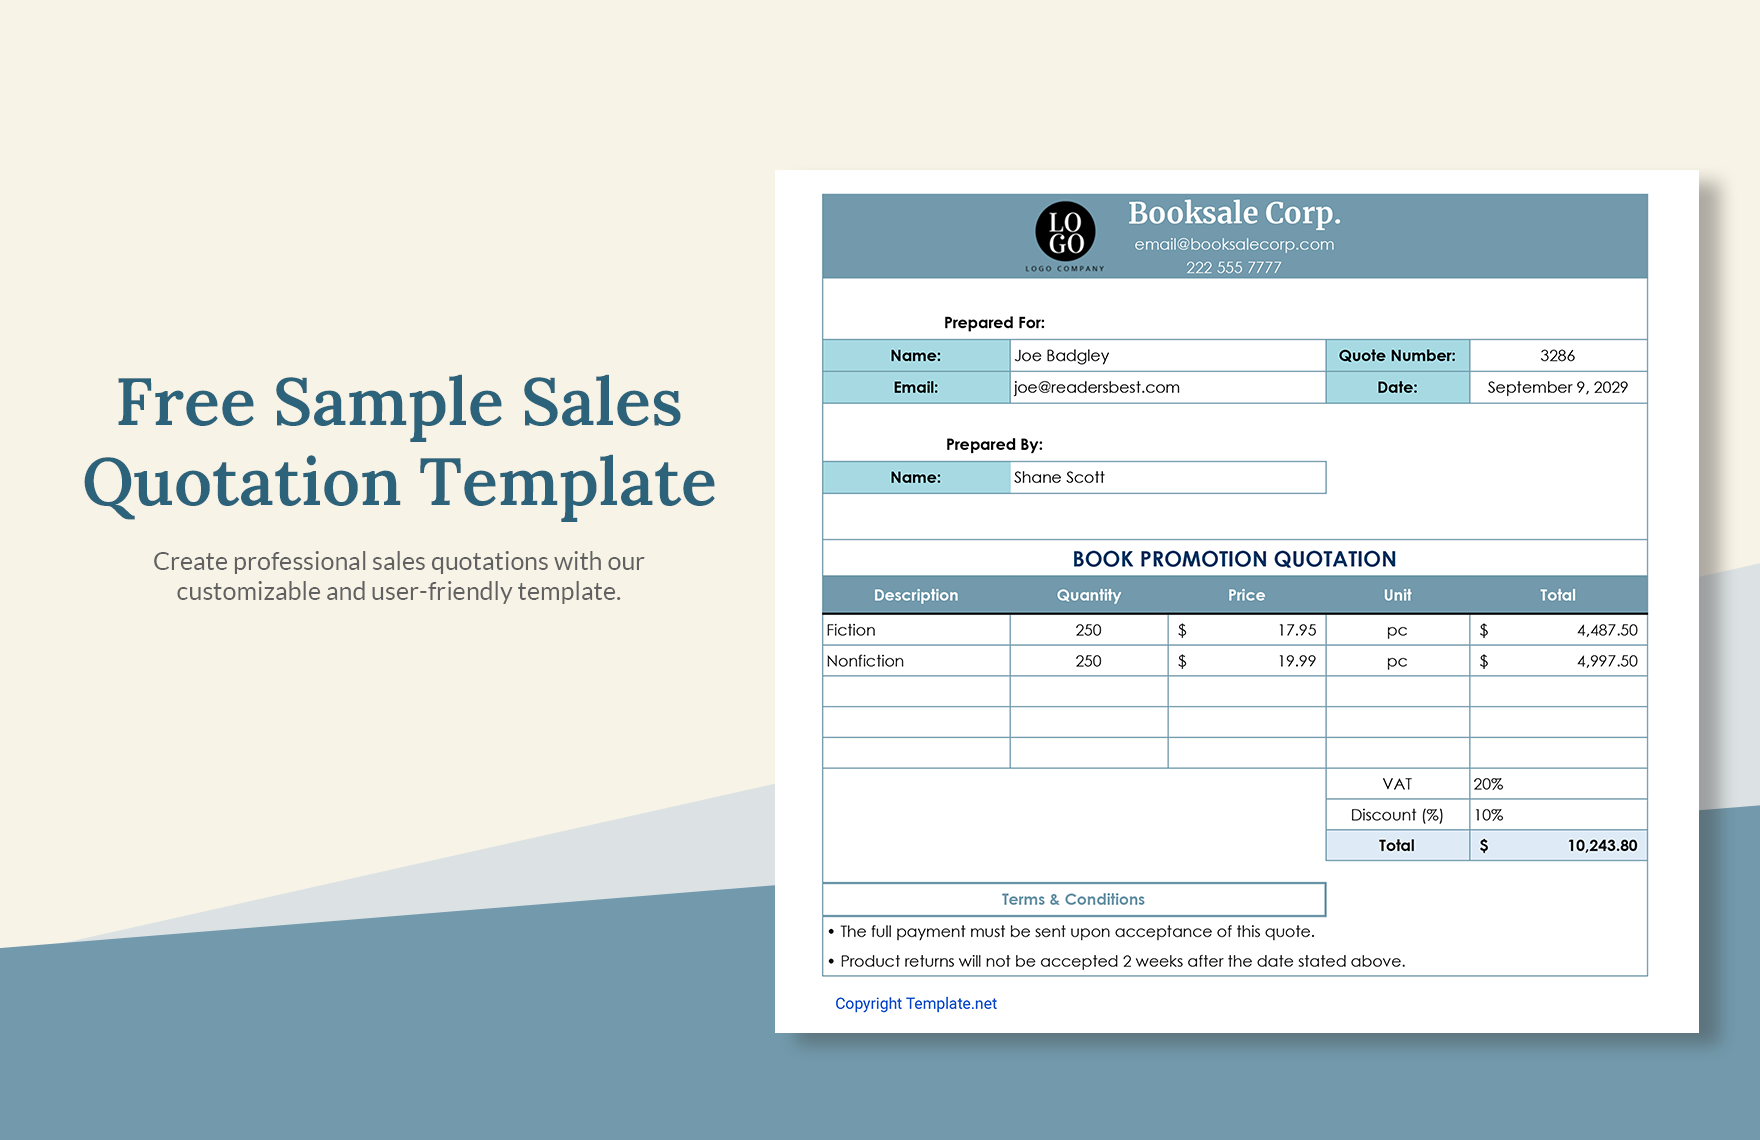 Sample Sales Quotation Template